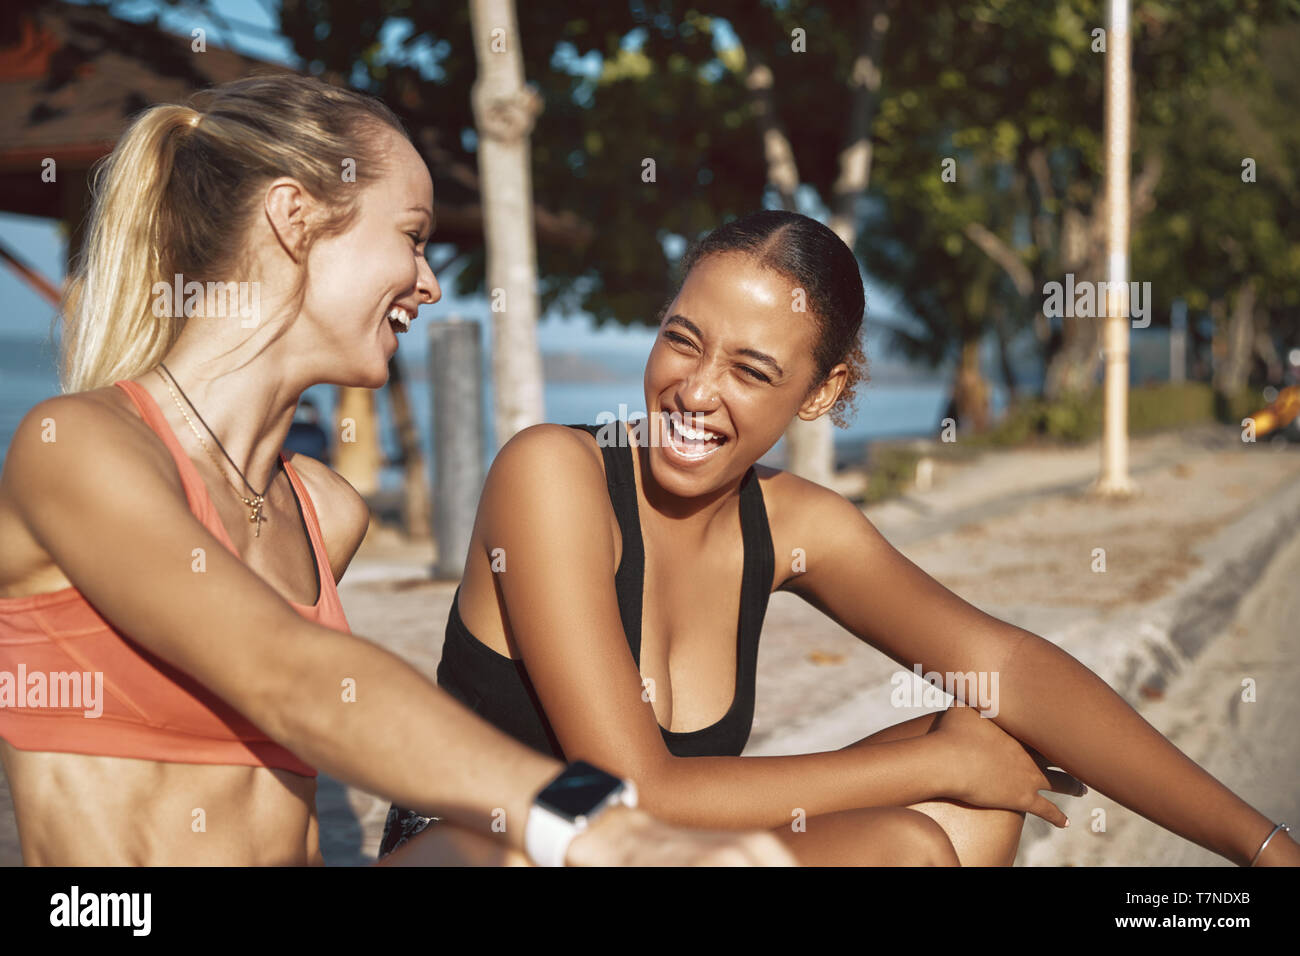 Two fit young women in sportswear stting on a curb talking and laughing while taking a break from their run Stock Photo